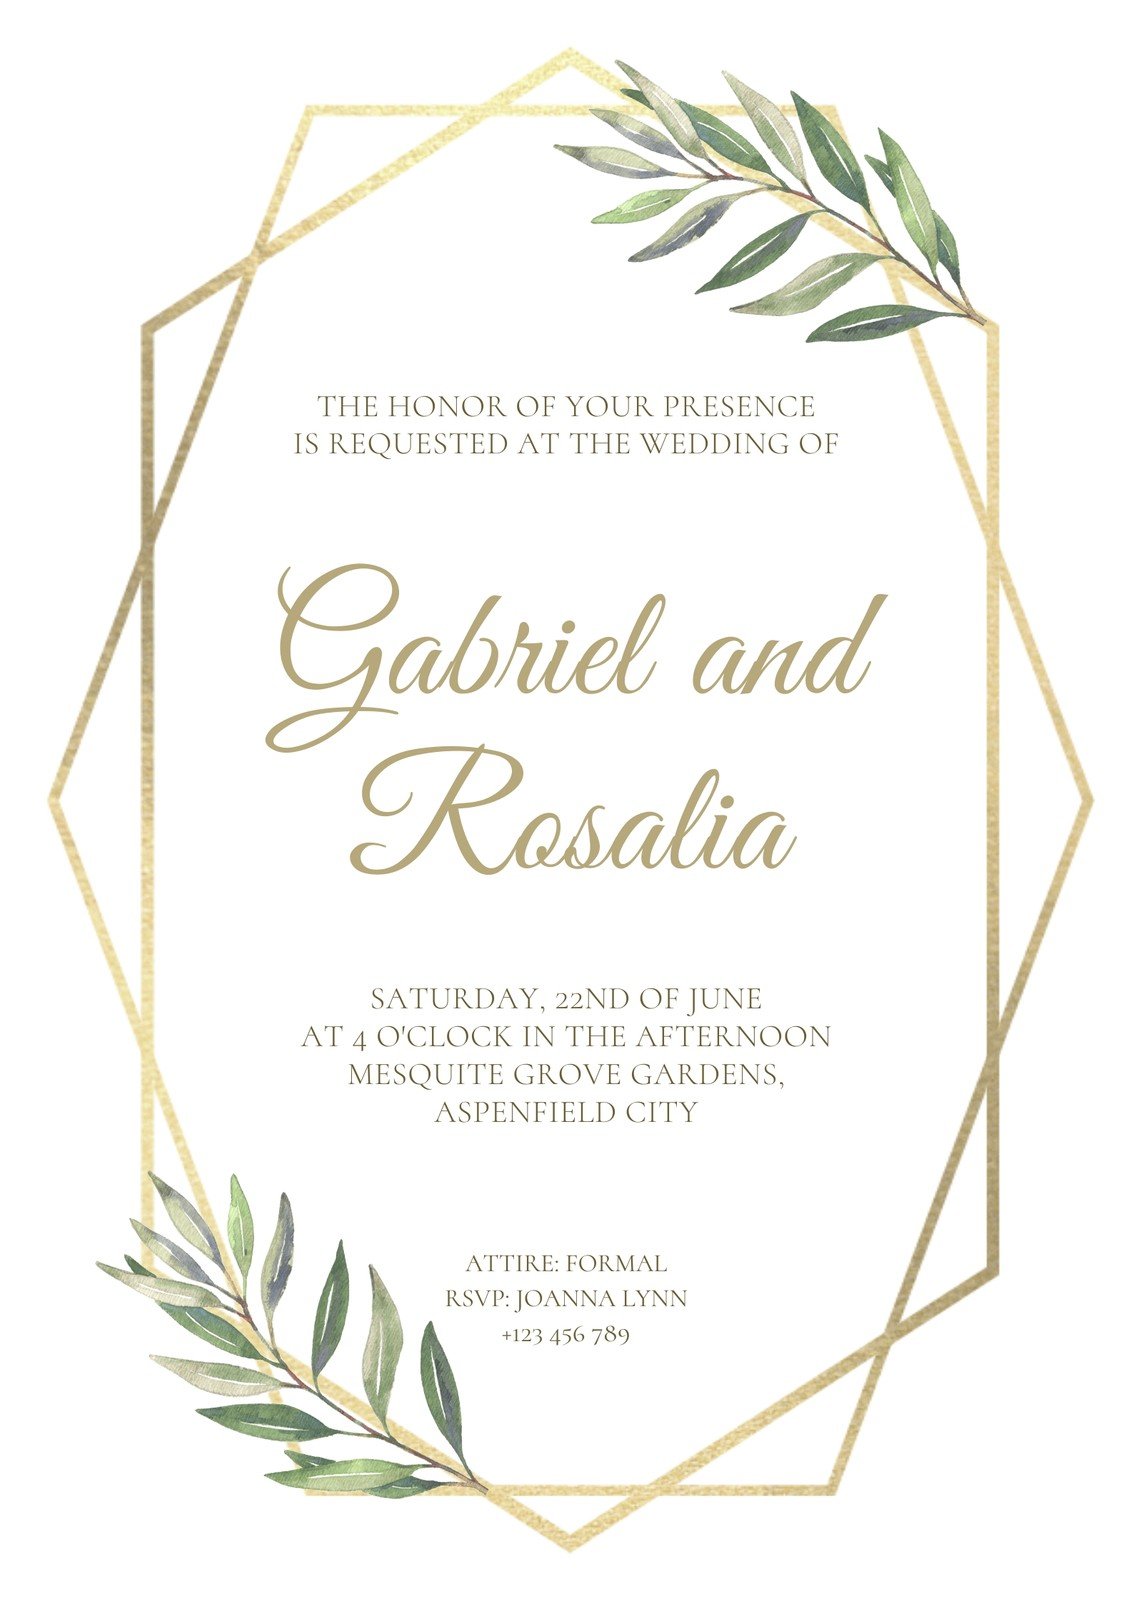 White And Gold Bordered Geometric Floral Wedding Invitation Templates By Canva